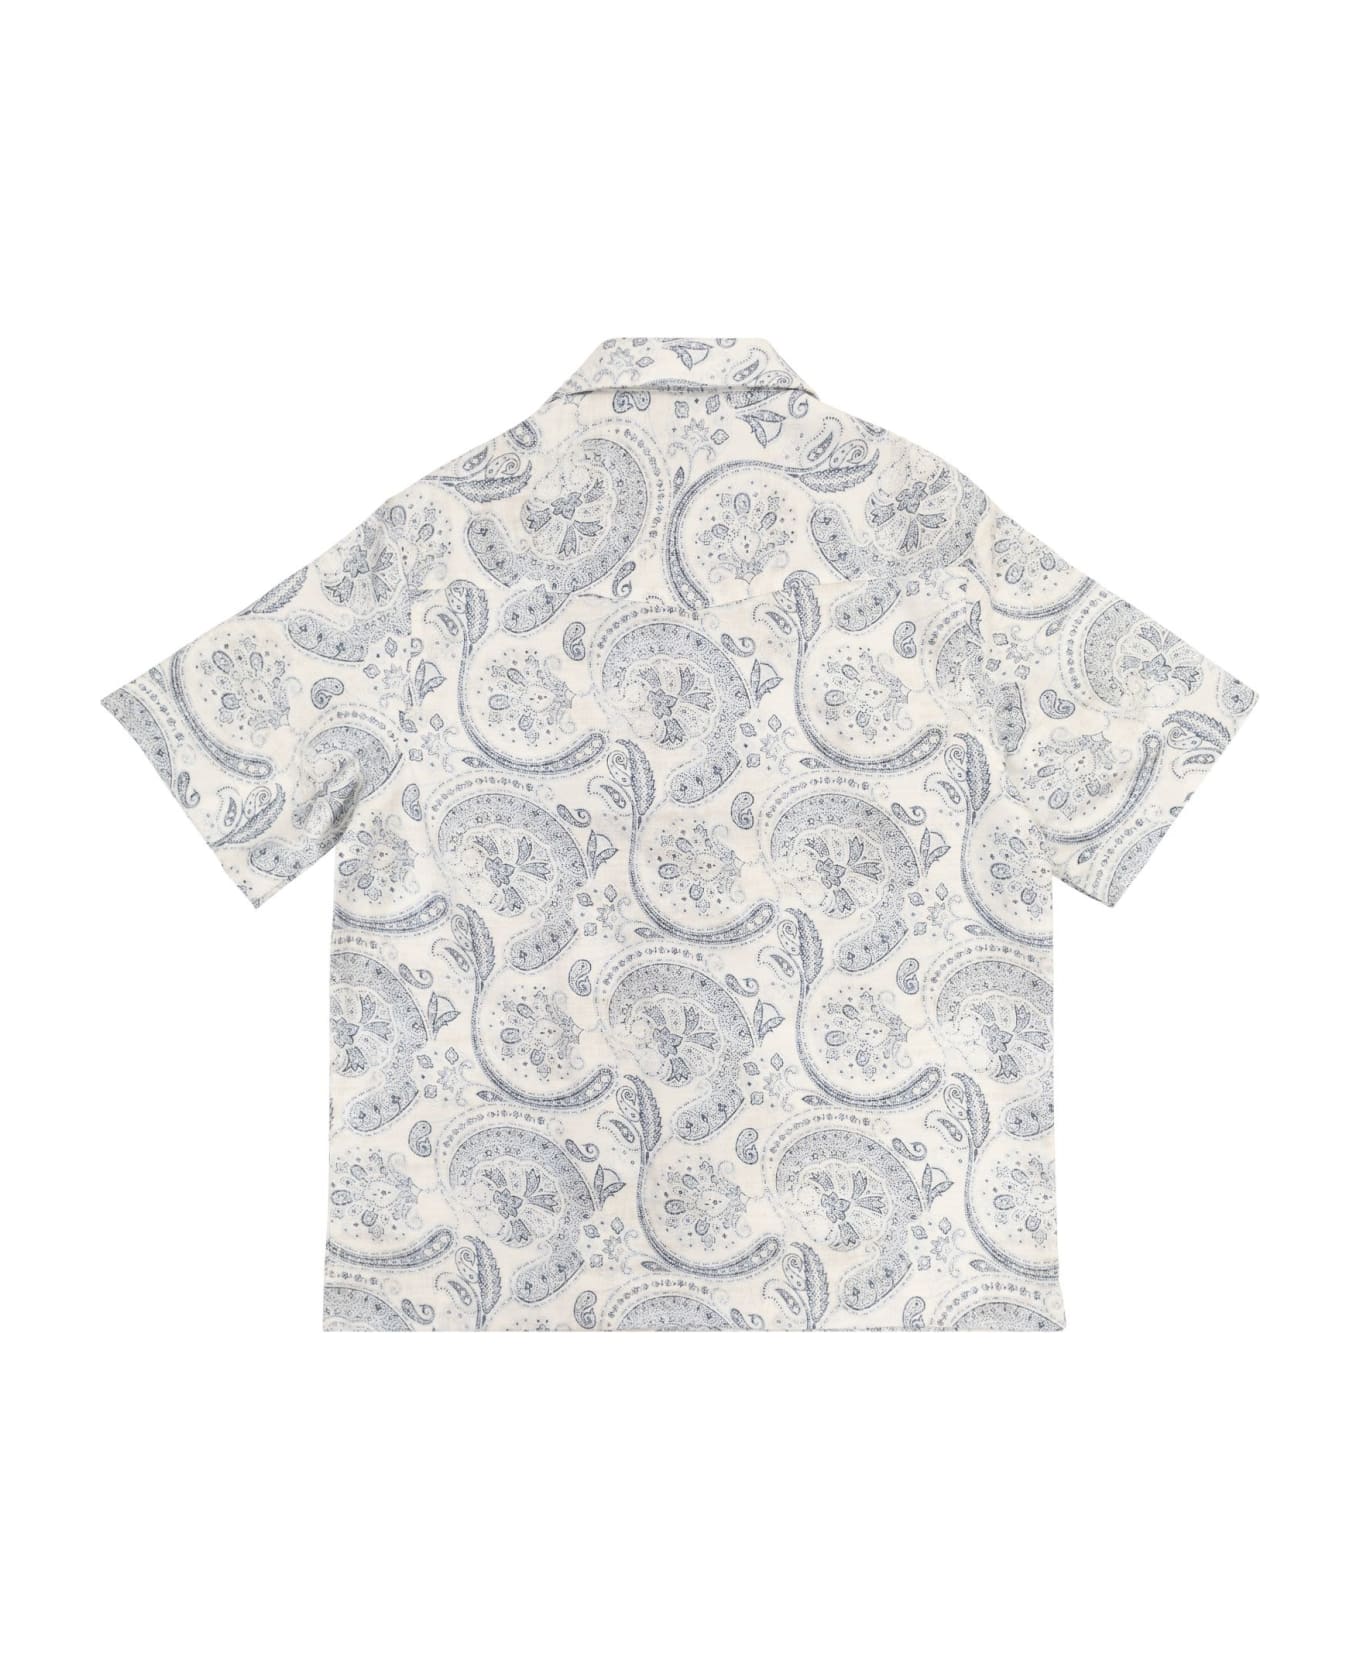 Brunello Cucinelli Paisley Print Linen Short-sleeved Shirt With Camp Collar - White/blue シャツ